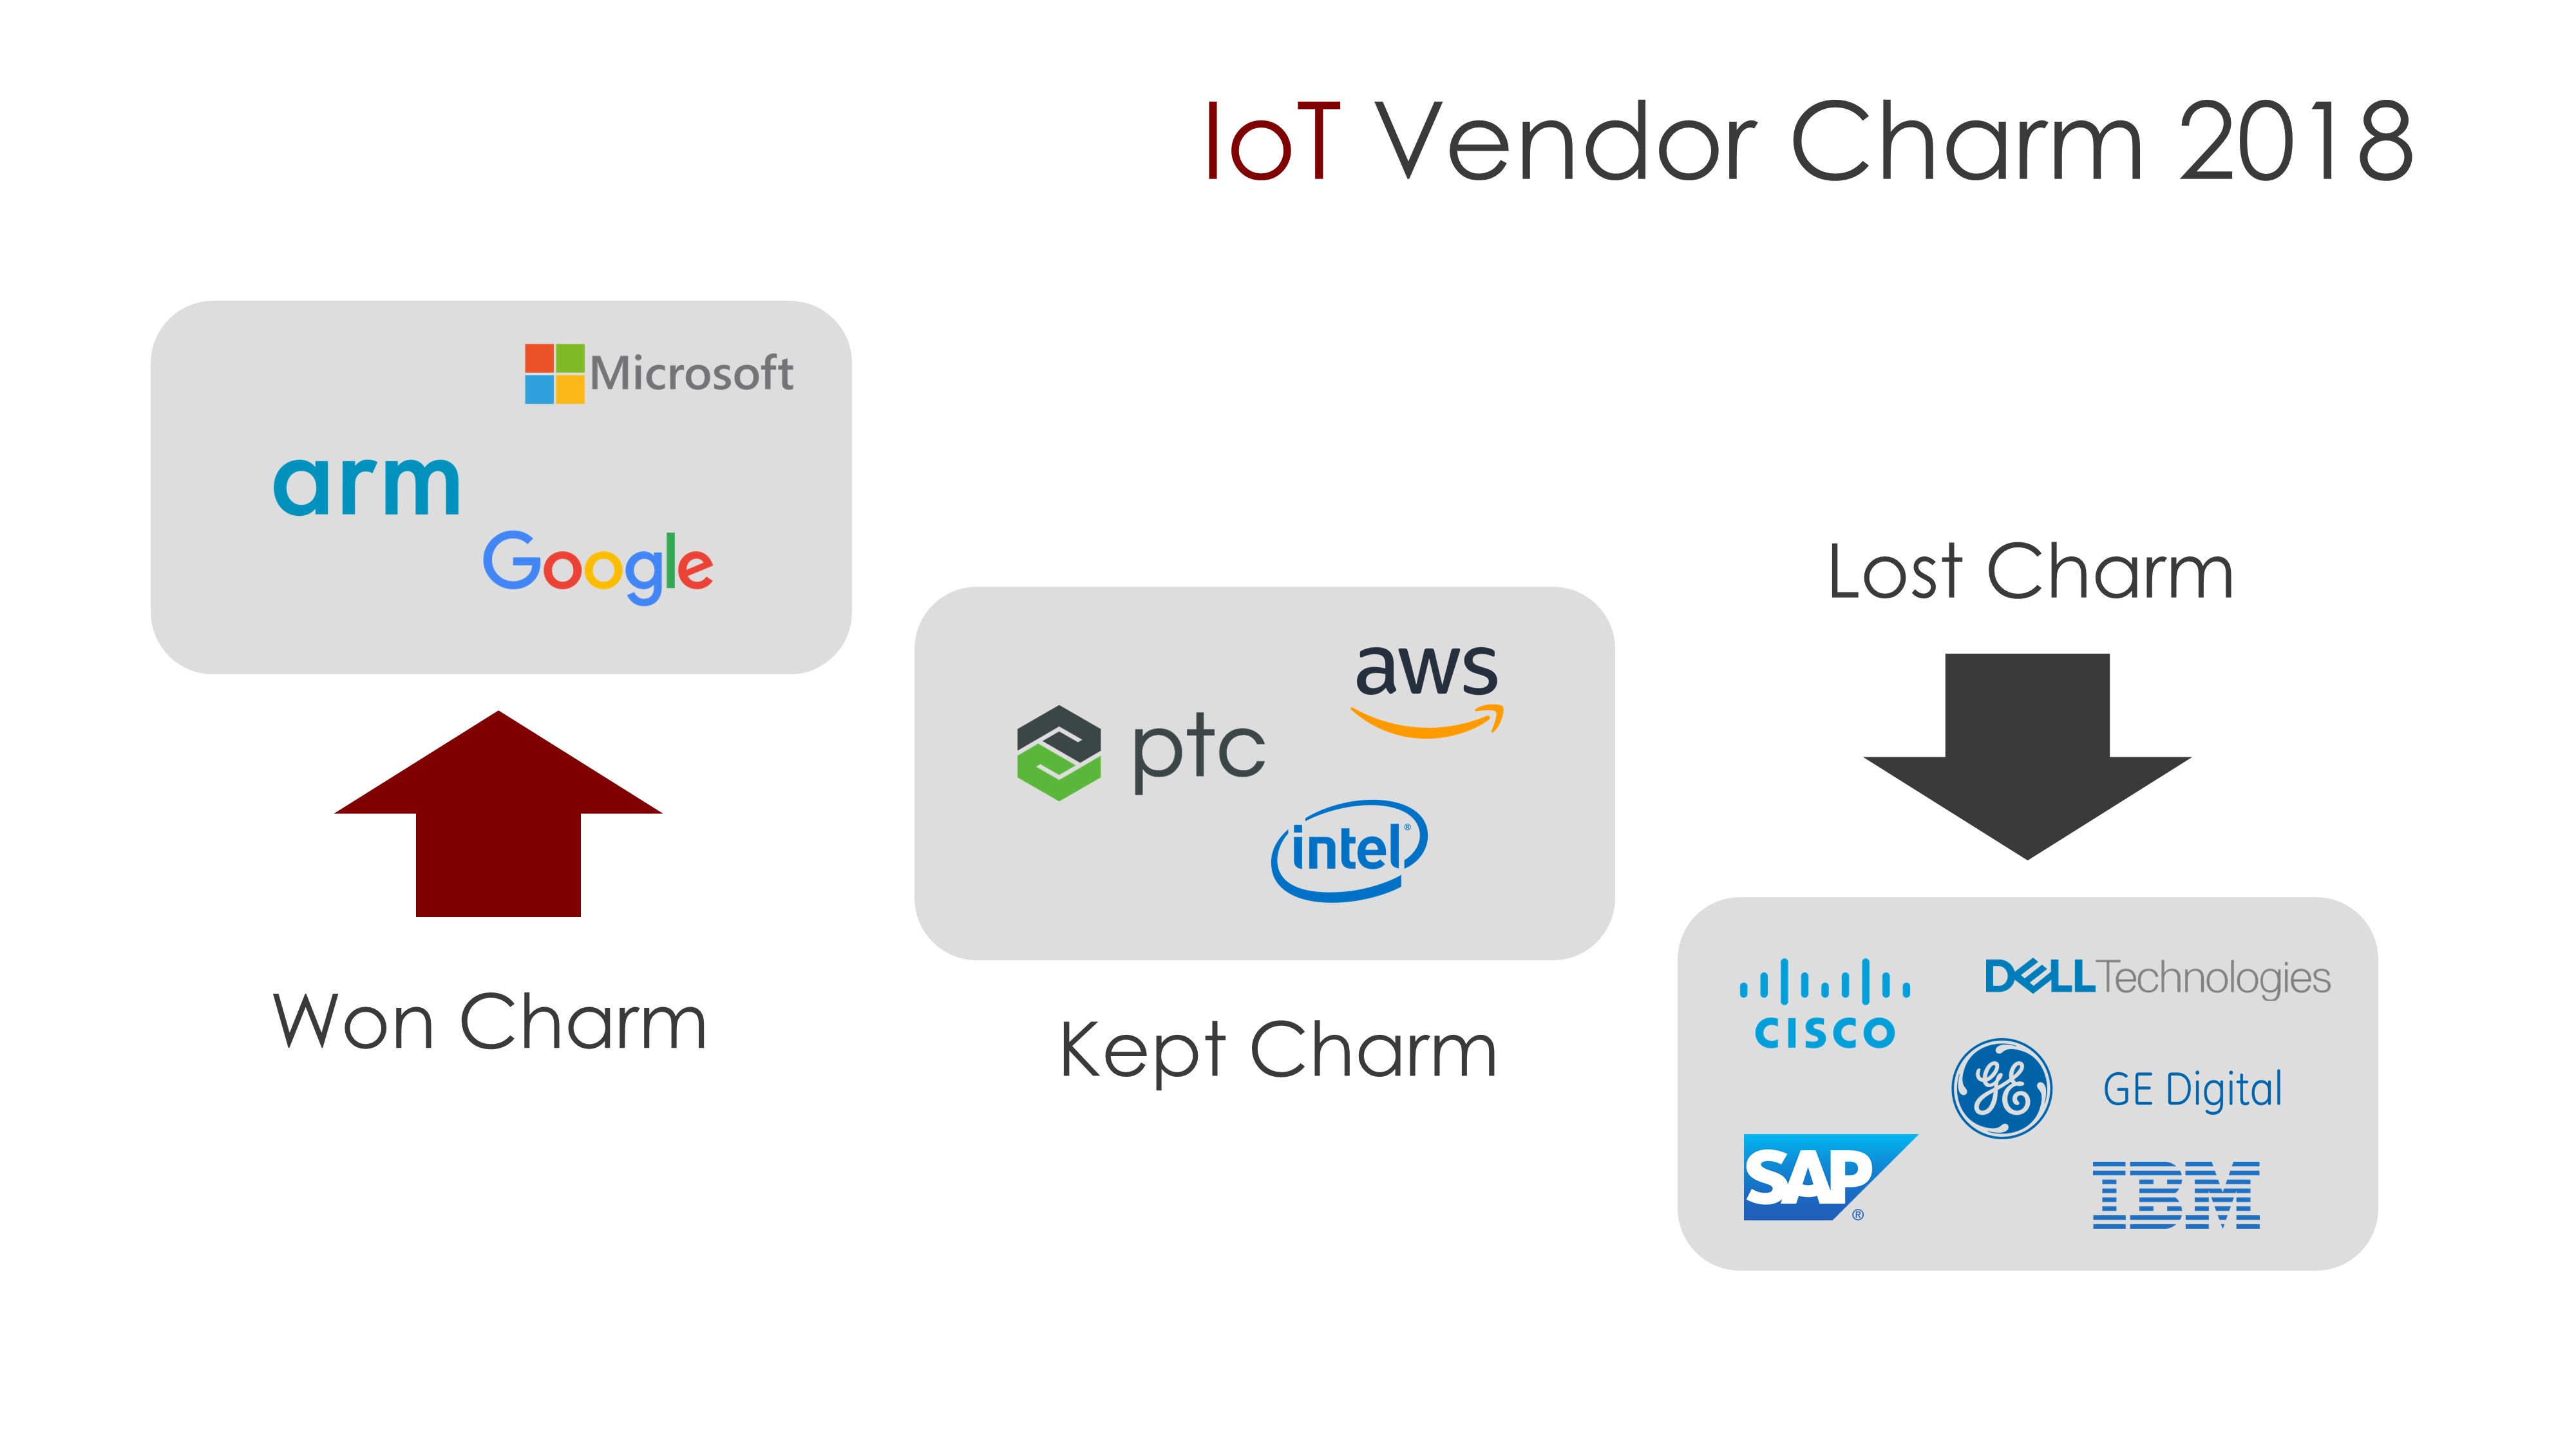 Which Top IoT Companies lost, kept and won their Charm in 2018?